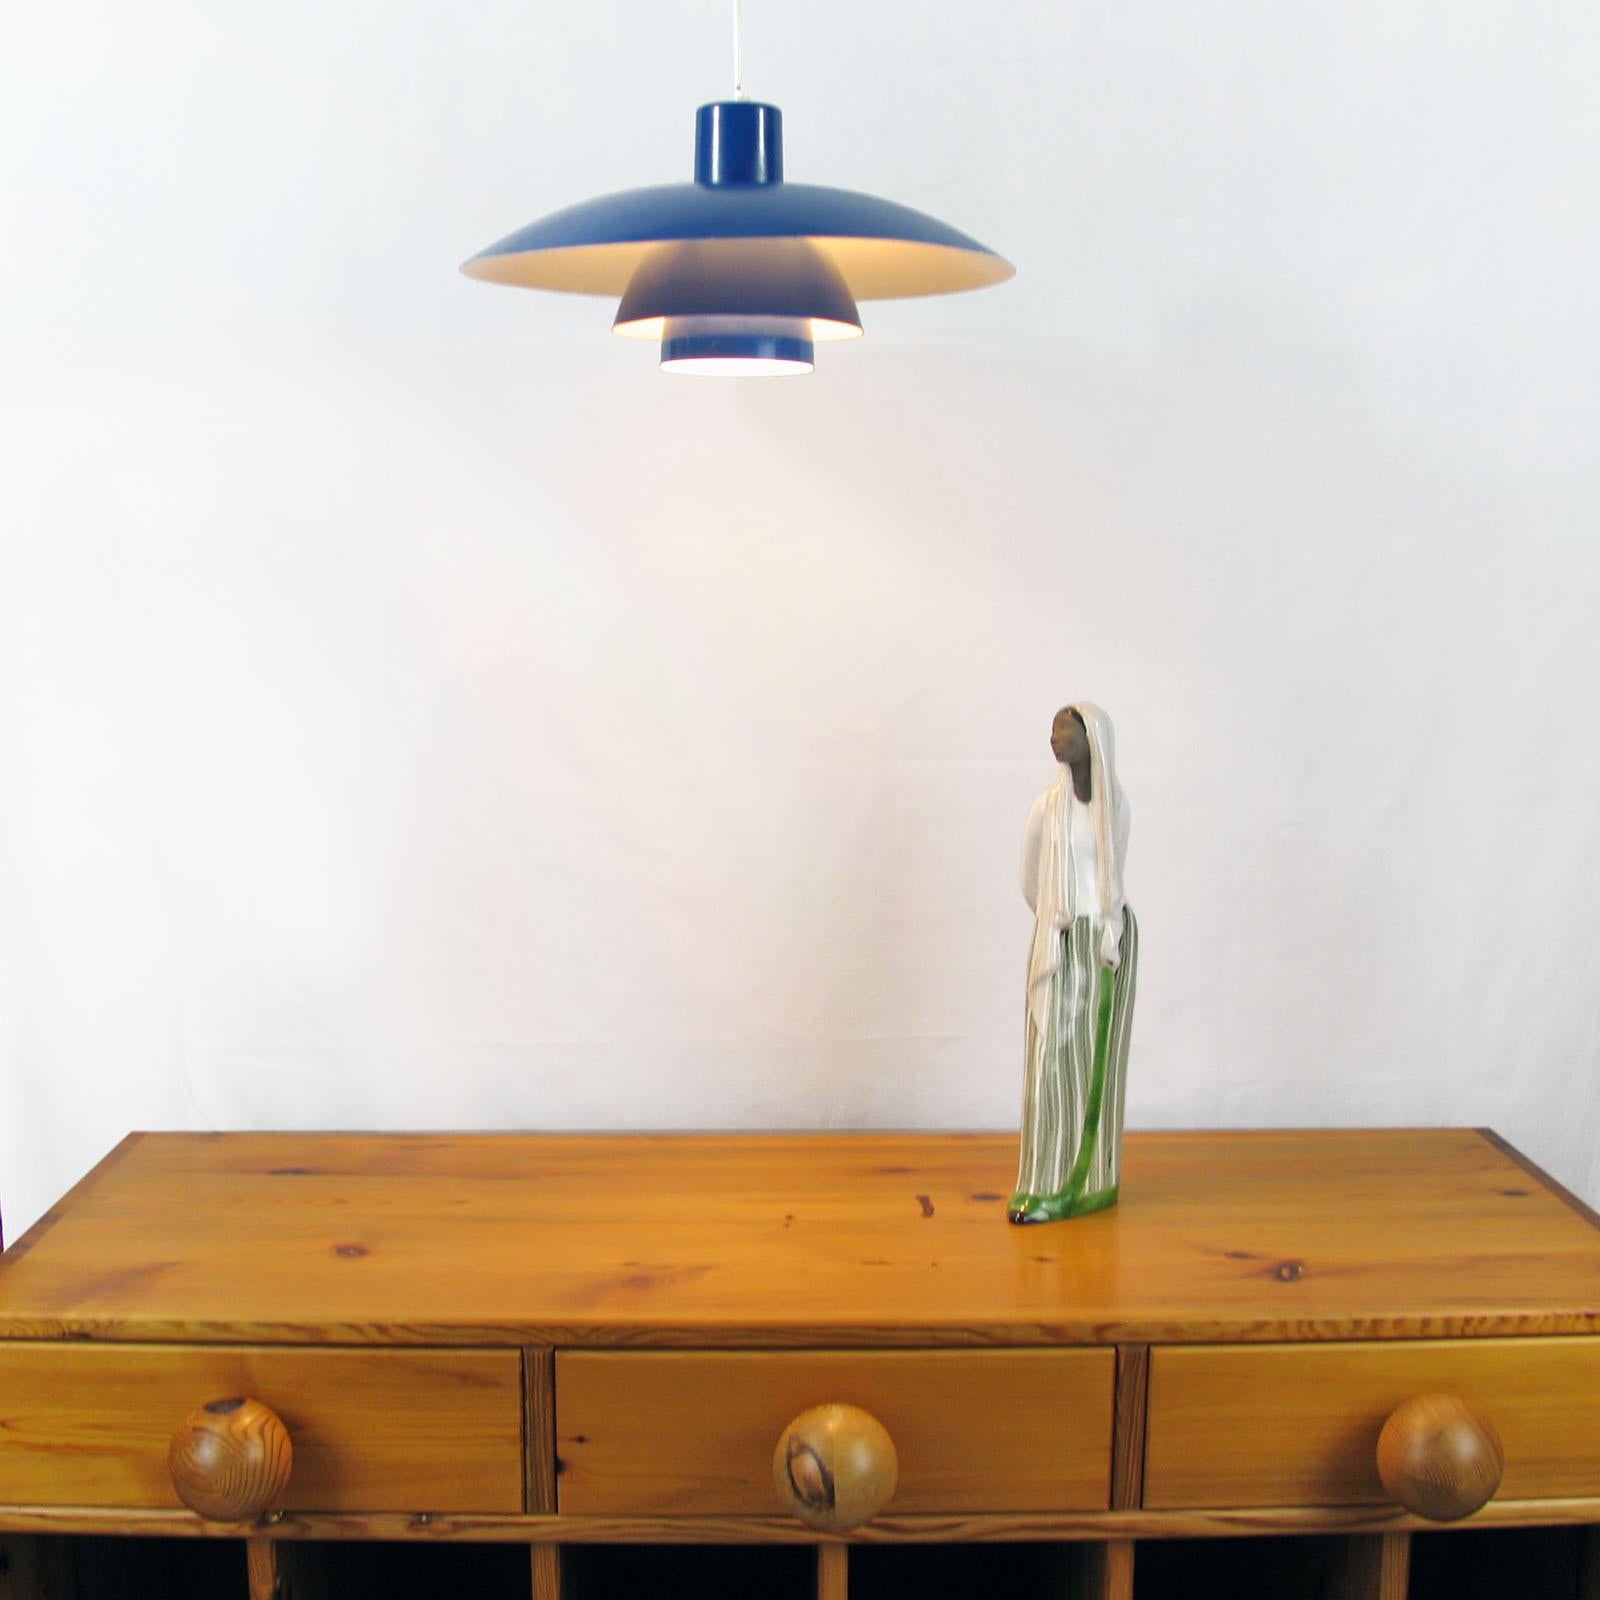 Danish pendant light by Poul Henningsen PH 4/3 for Louis Poulsen.
Classic pendant light of the series PH designed by Poul Henningsen in 1966 for Louis Poulsen. Vibrant blue color with inner orange details, made of lacquered aluminum. In good